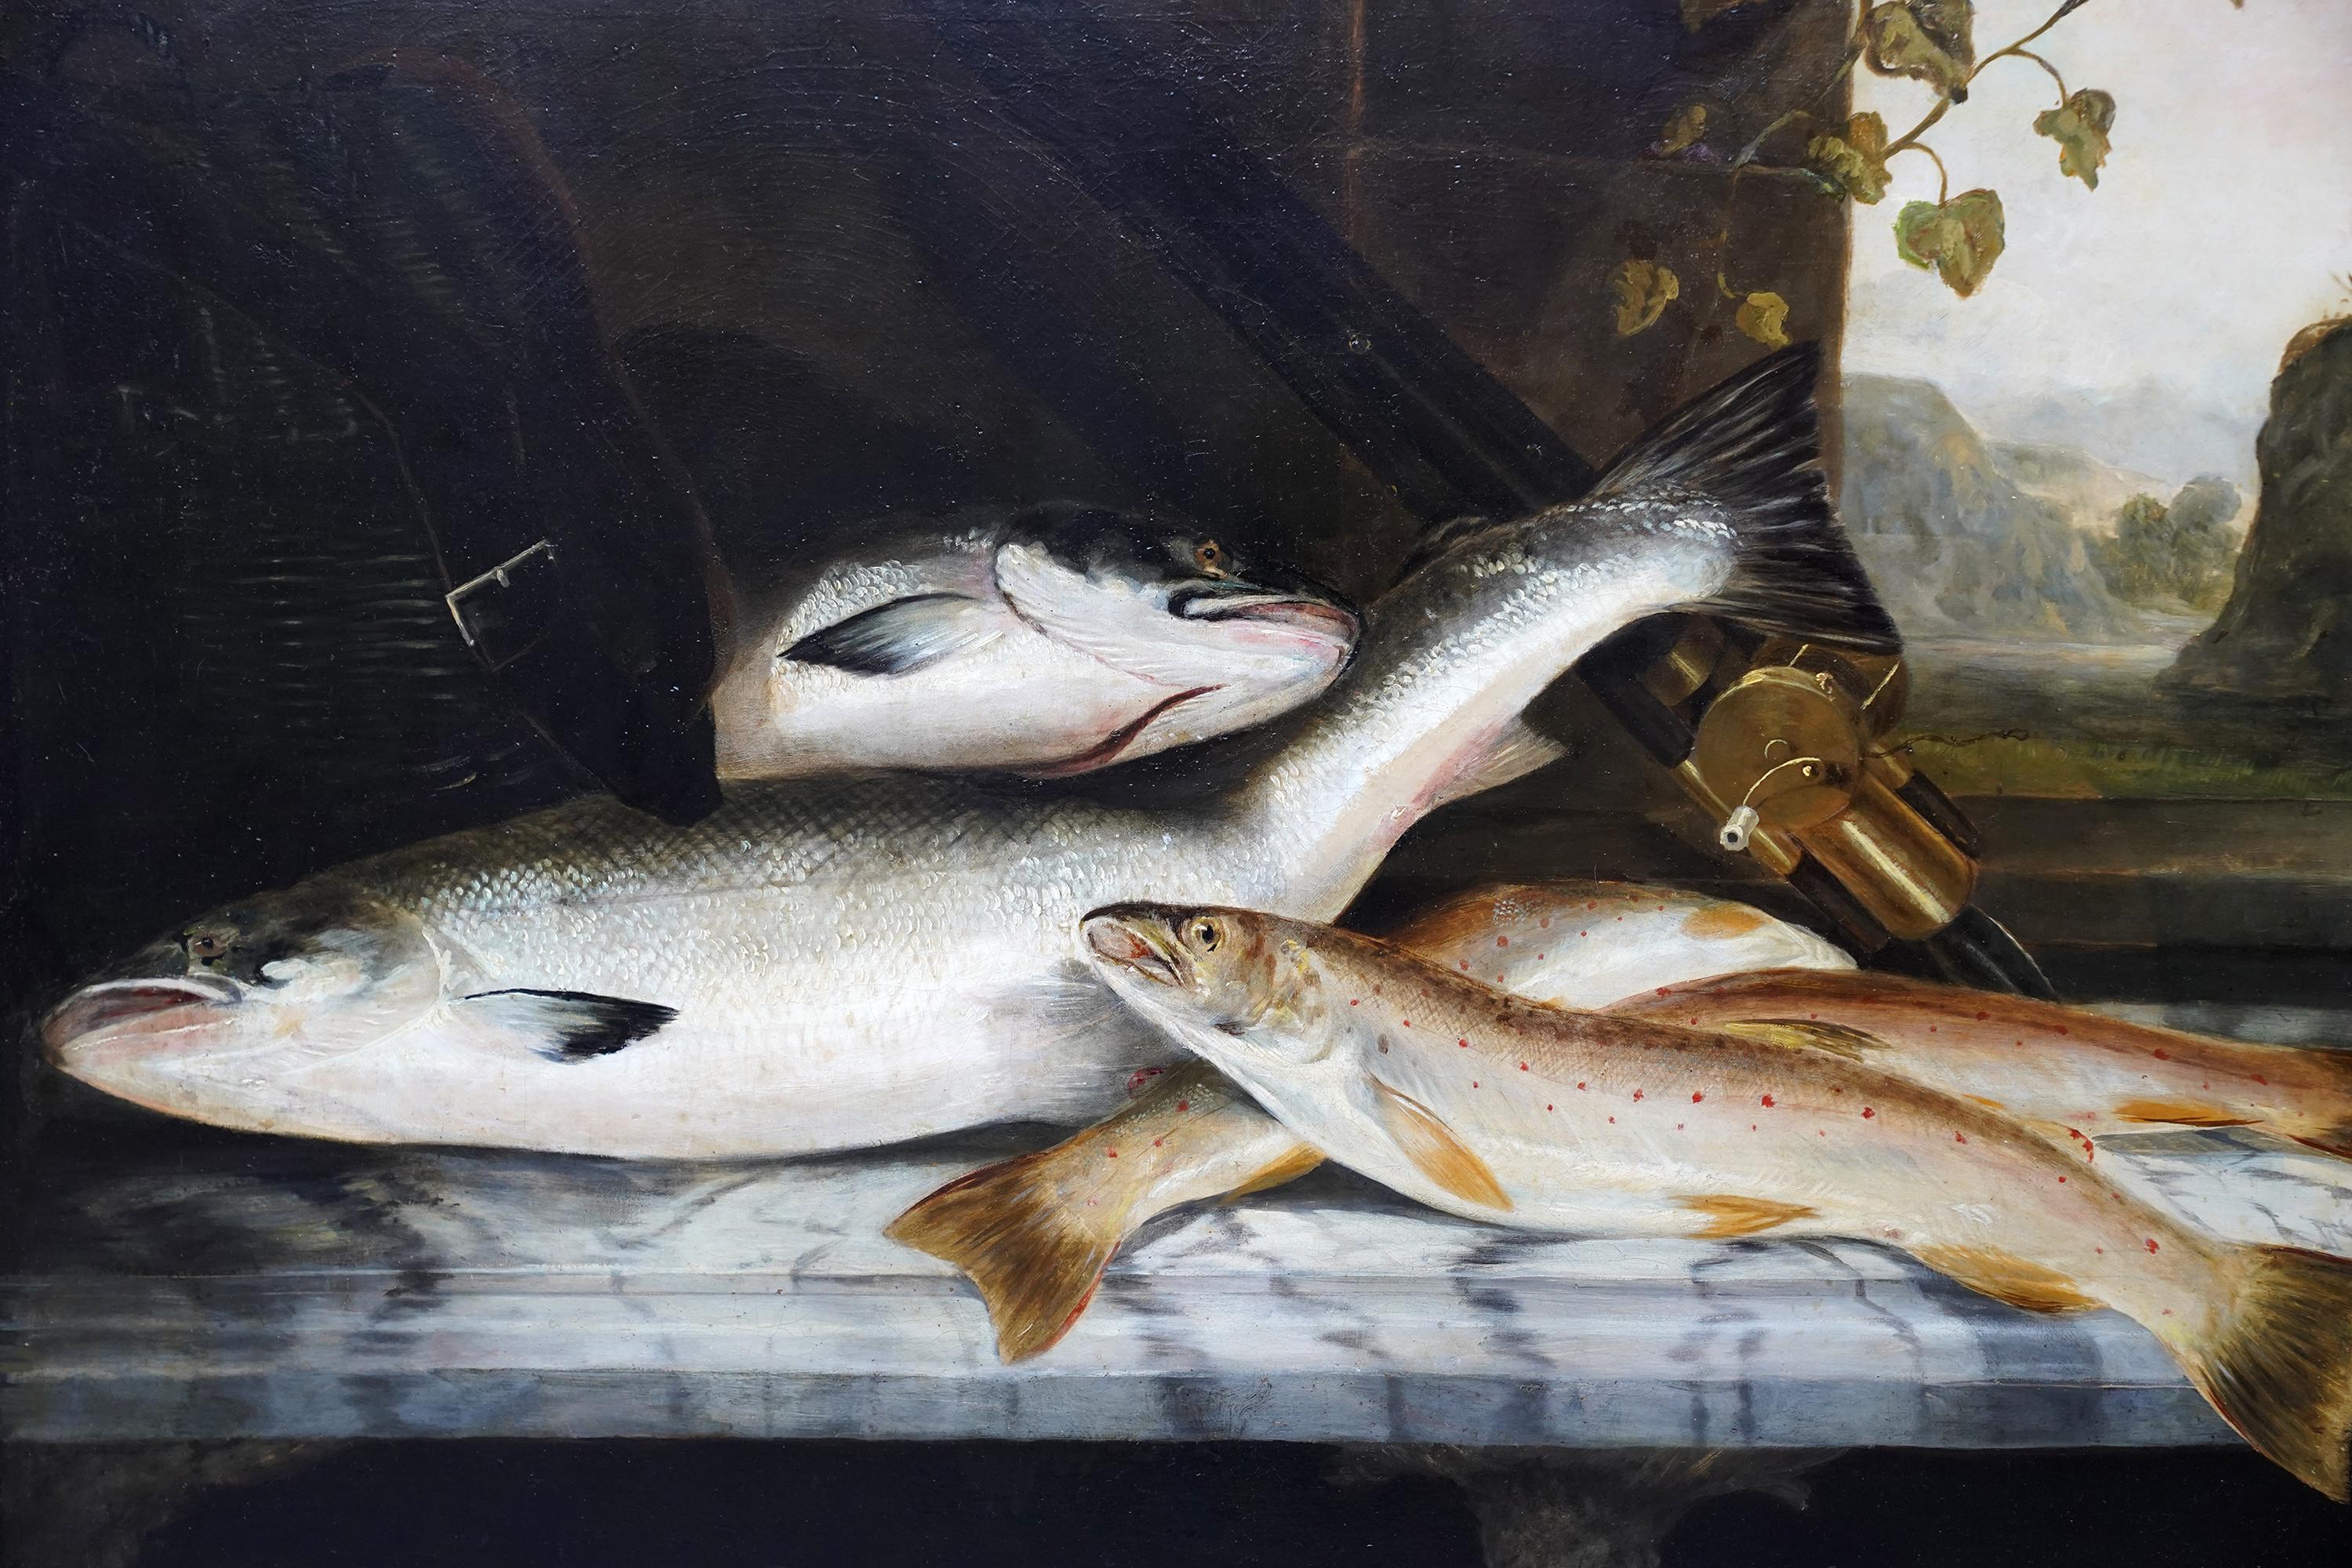 This beautifully composed British Edwardian still life oil painting is attributed to noted fish artist Rowland Knight. Painted circa 1910 it is a still life of salmon and rainbow trout with all their beautiful markings. The fish are arranged on a